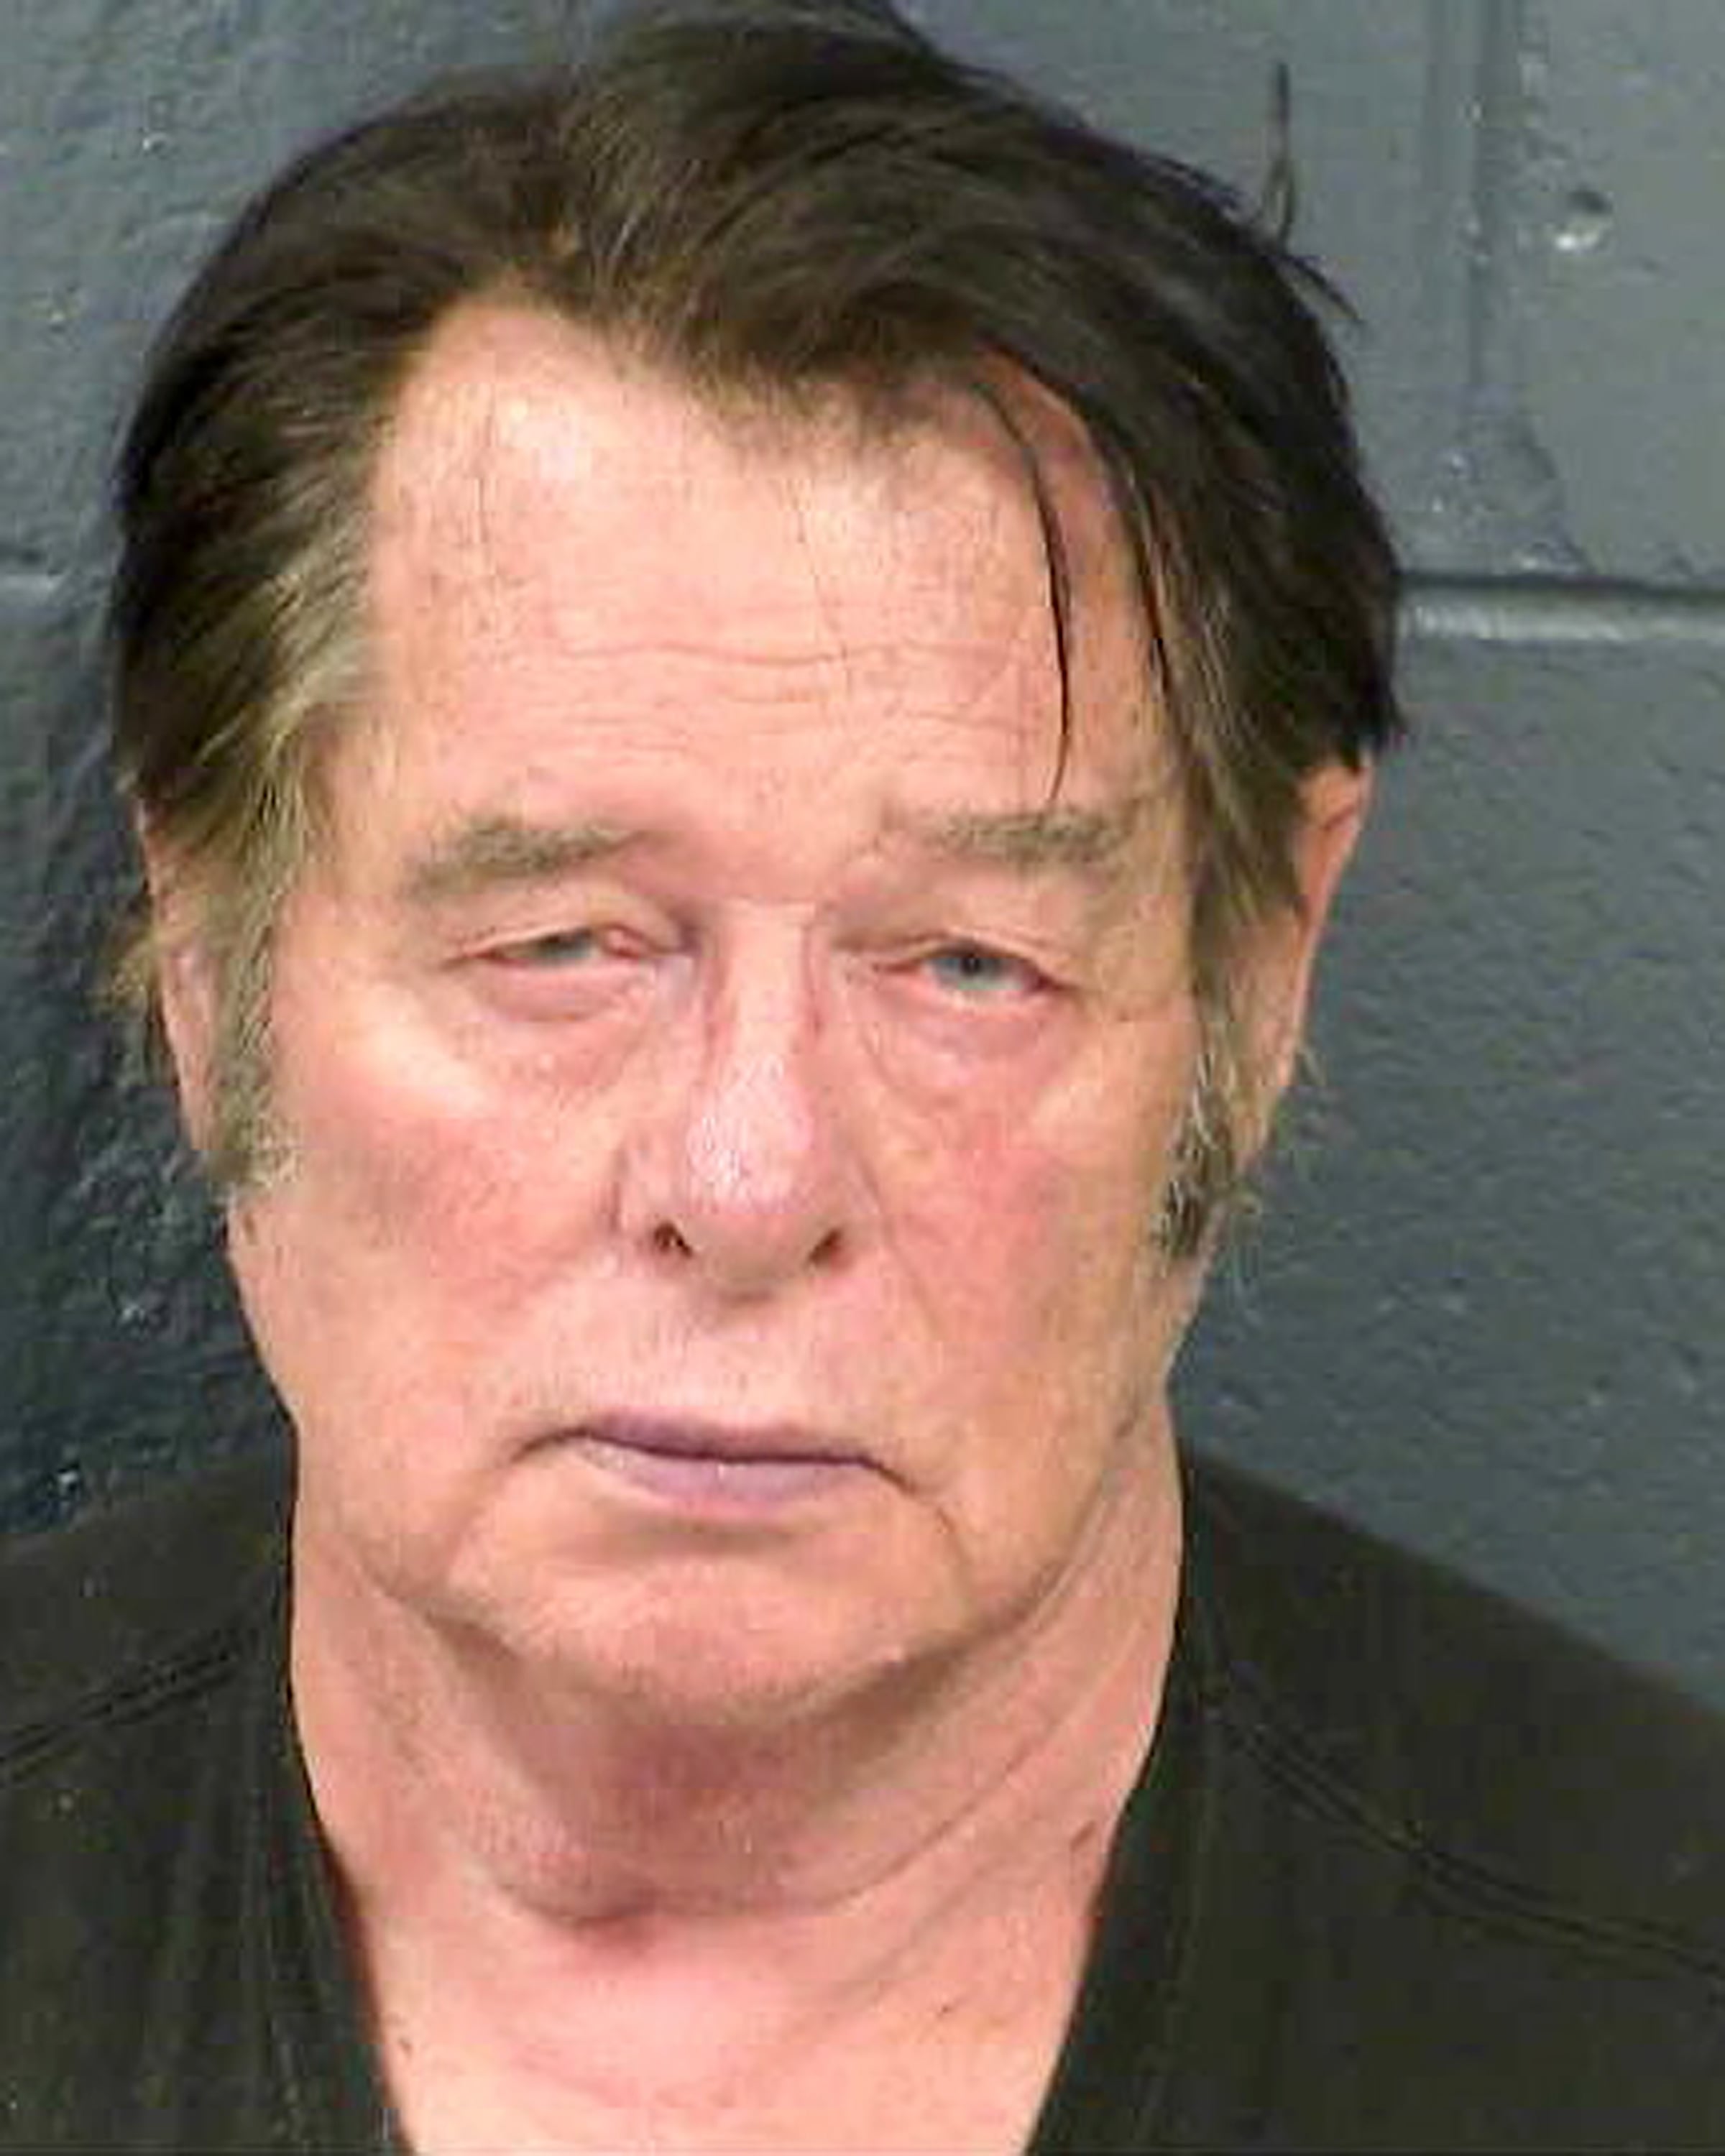 This April 20, 2019 booking photo from the Dona Ana County Sheriff's Office shows Larry Hopkins. Authorities say that Hopkins, 69, the leader of a group that has detained asylum-speaking migrants along the U.S.-Mexico border, was injured while he was jailed in Las Cruces, N.M., after being arrested on federal weapons charges. The Dona Ana County Sheriff's Office said Wednesday, April 24, 2019 in a statement that Hopkins was transferred Tuesday out of the county jail after suffering non-life threatening injuries Monday night.